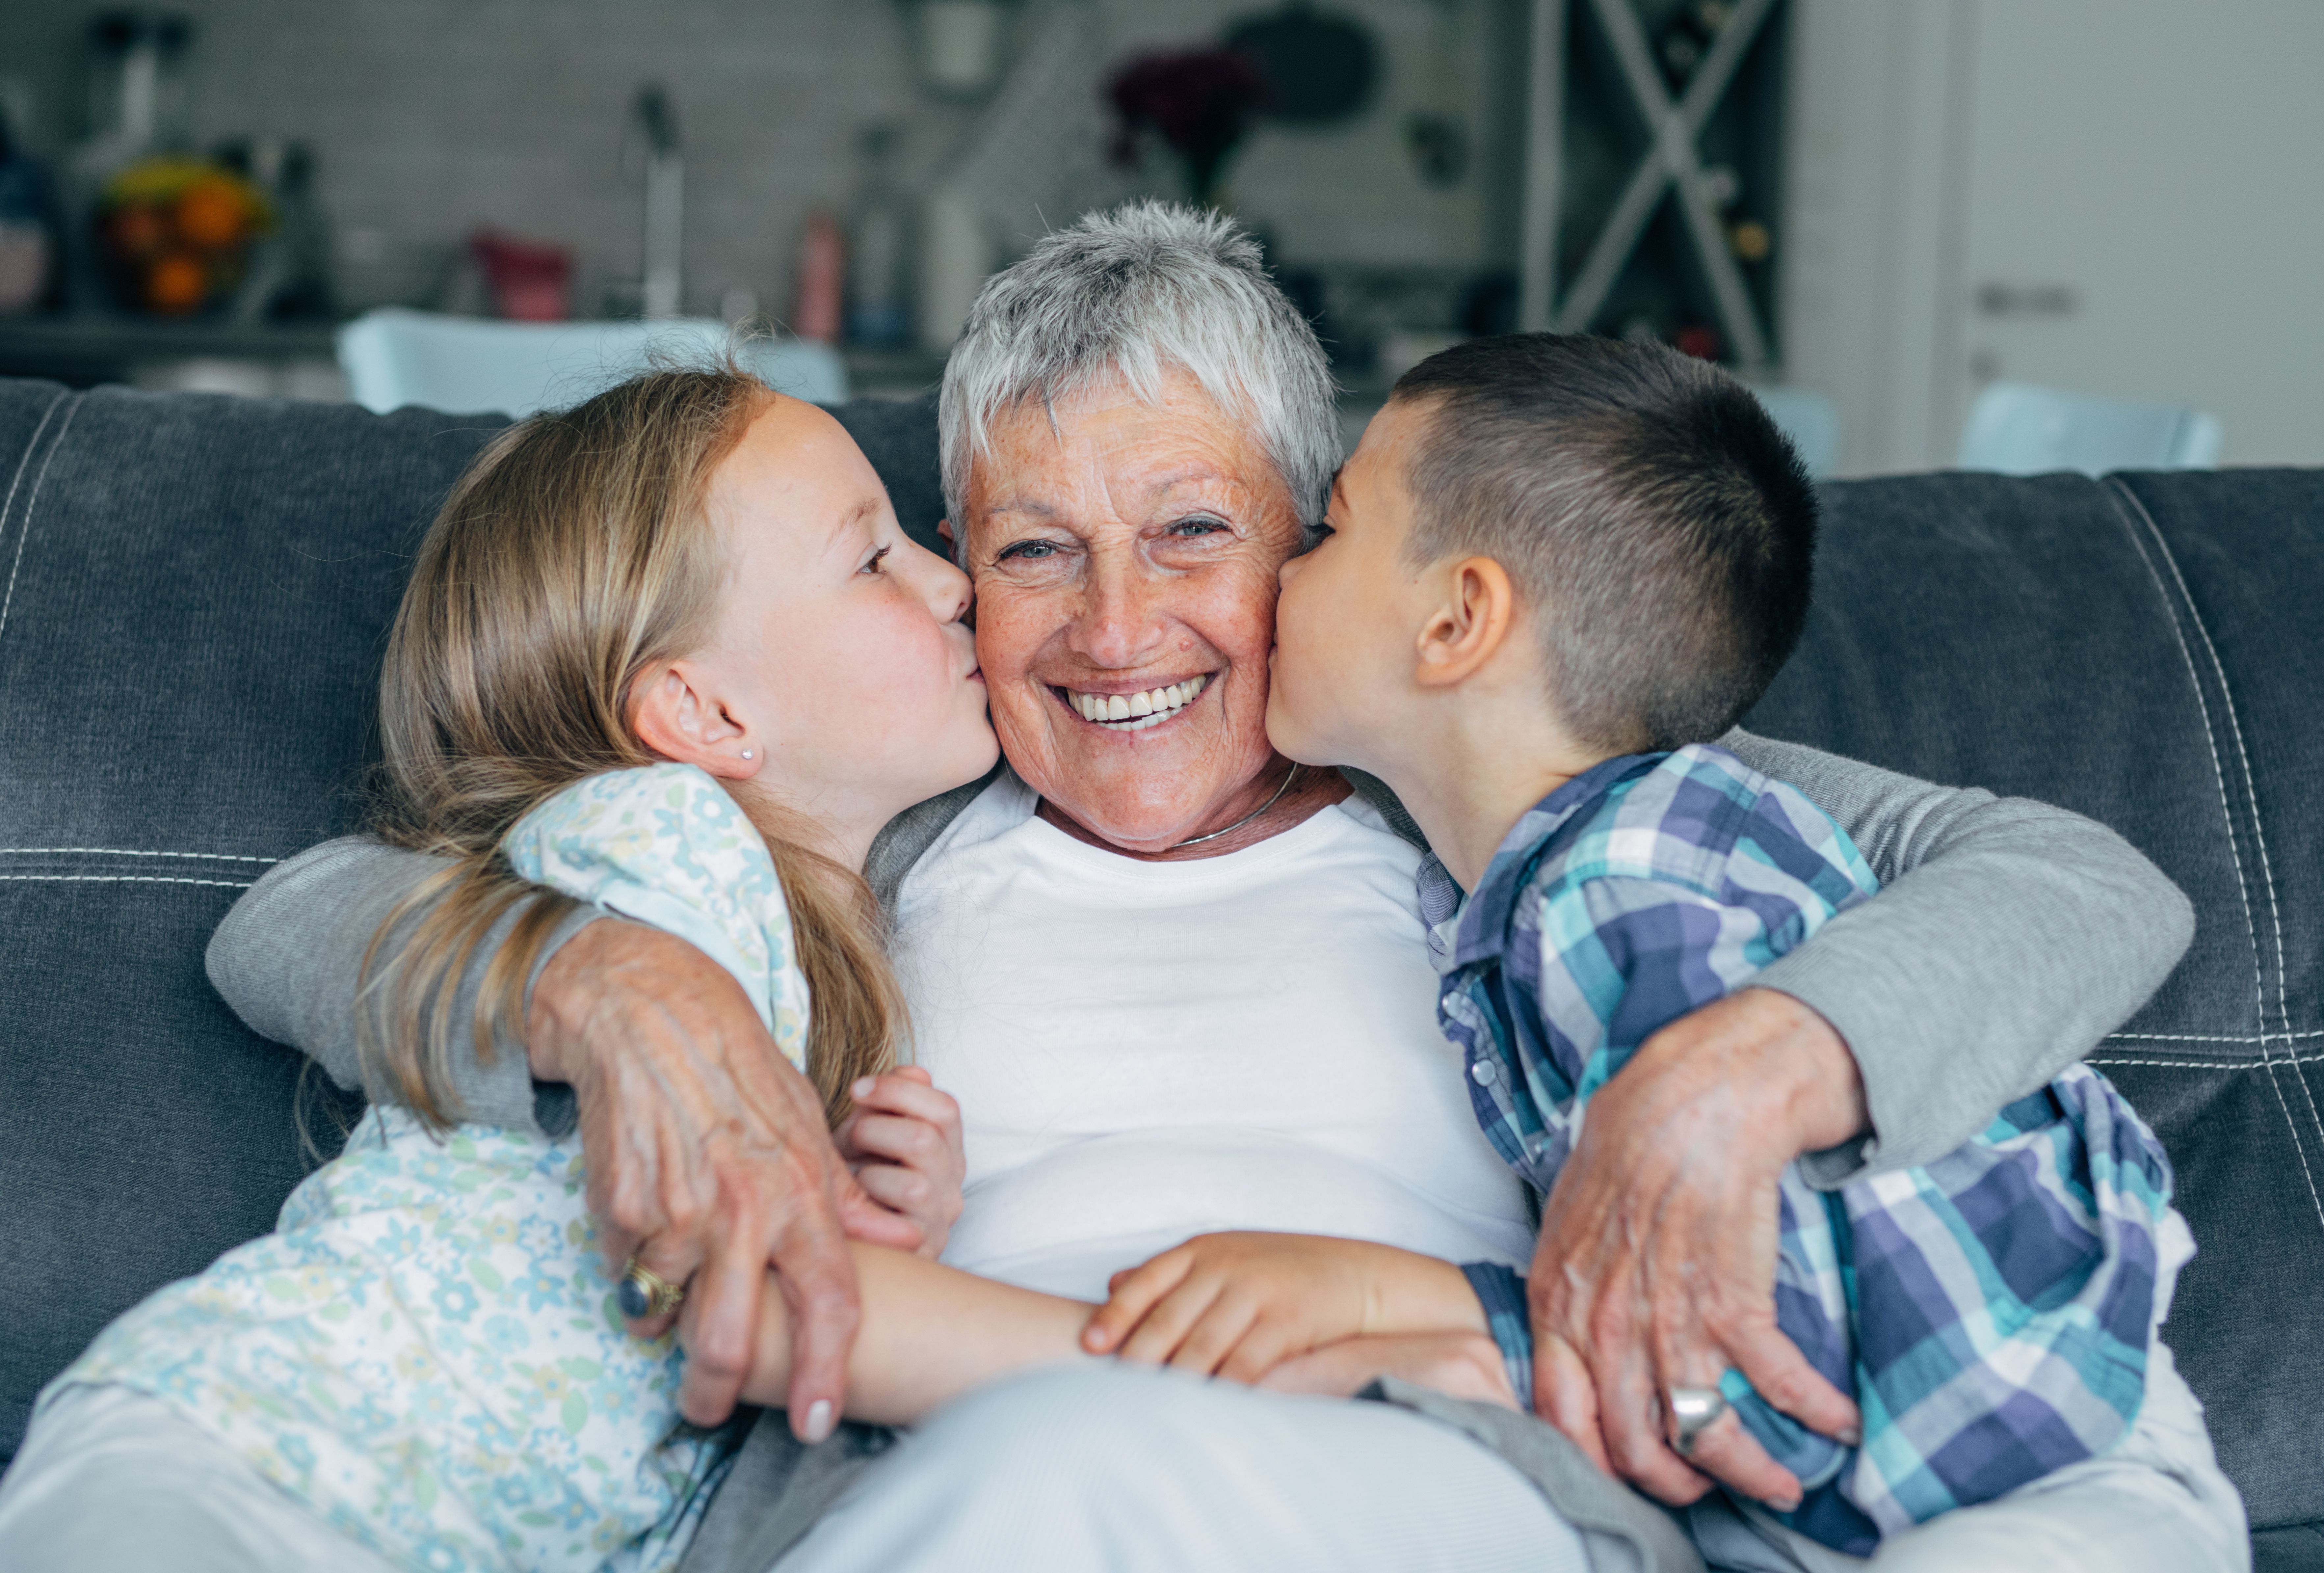 Grandkids kissing their grandmother on the cheek | Source: Getty Images